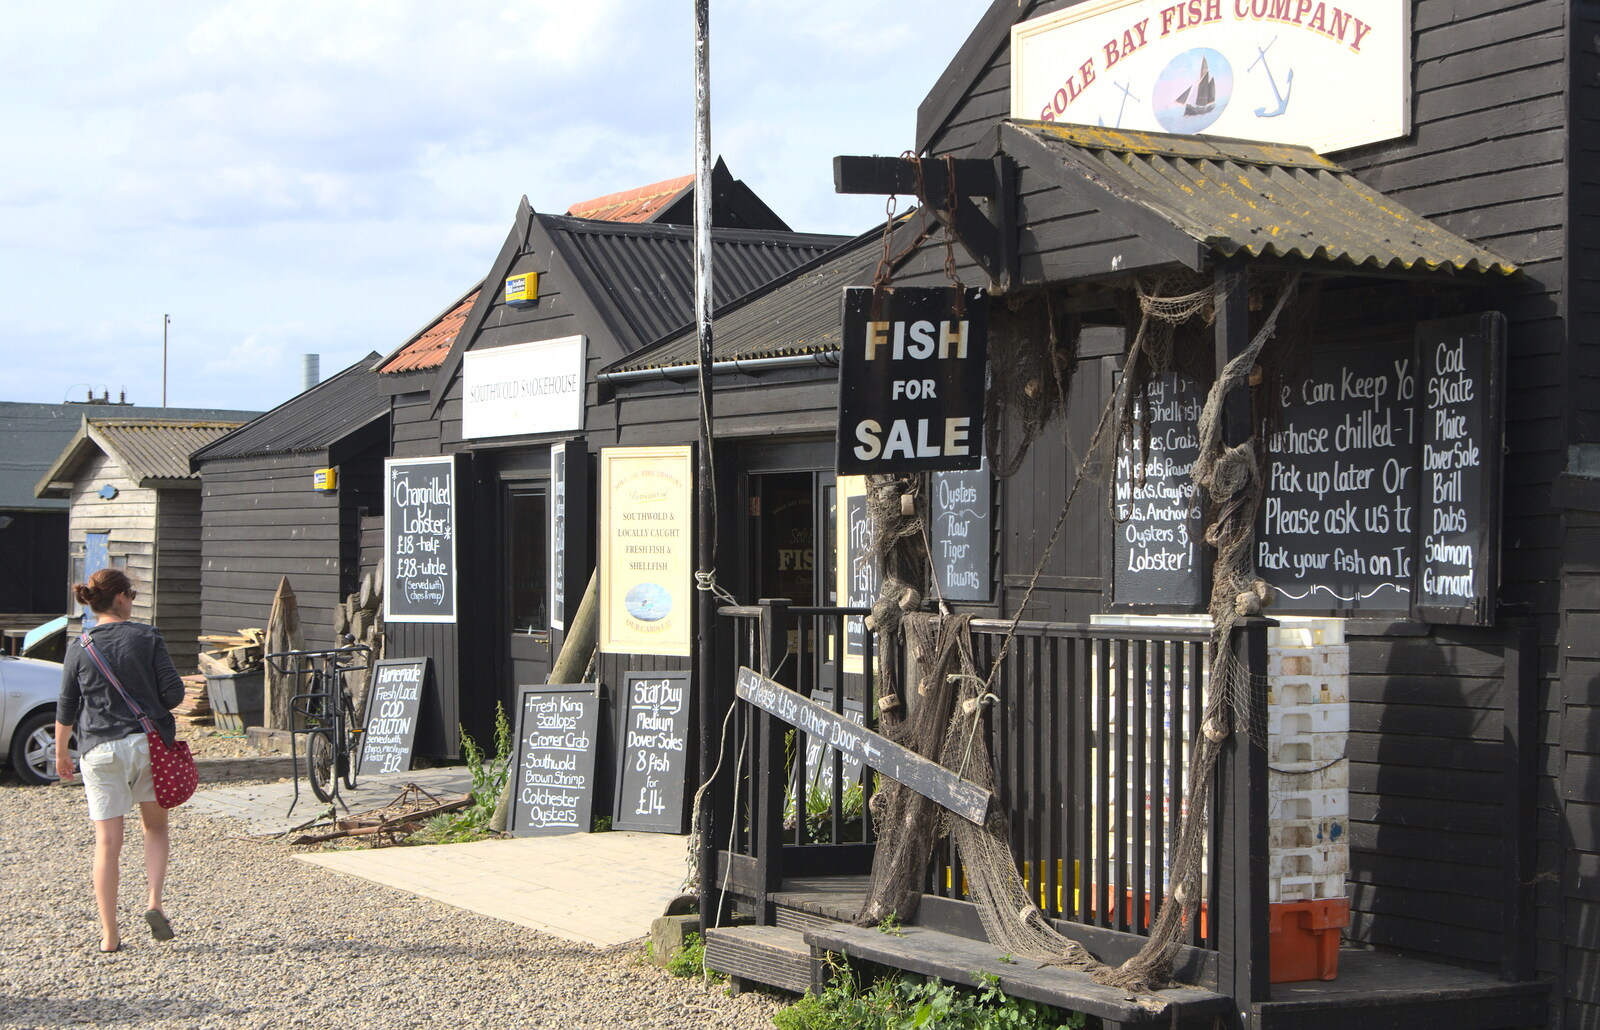 Fish for sale from The Danger of Trees: A Camping (Mis)adventure - Southwold, Suffolk - 3rd August 2015